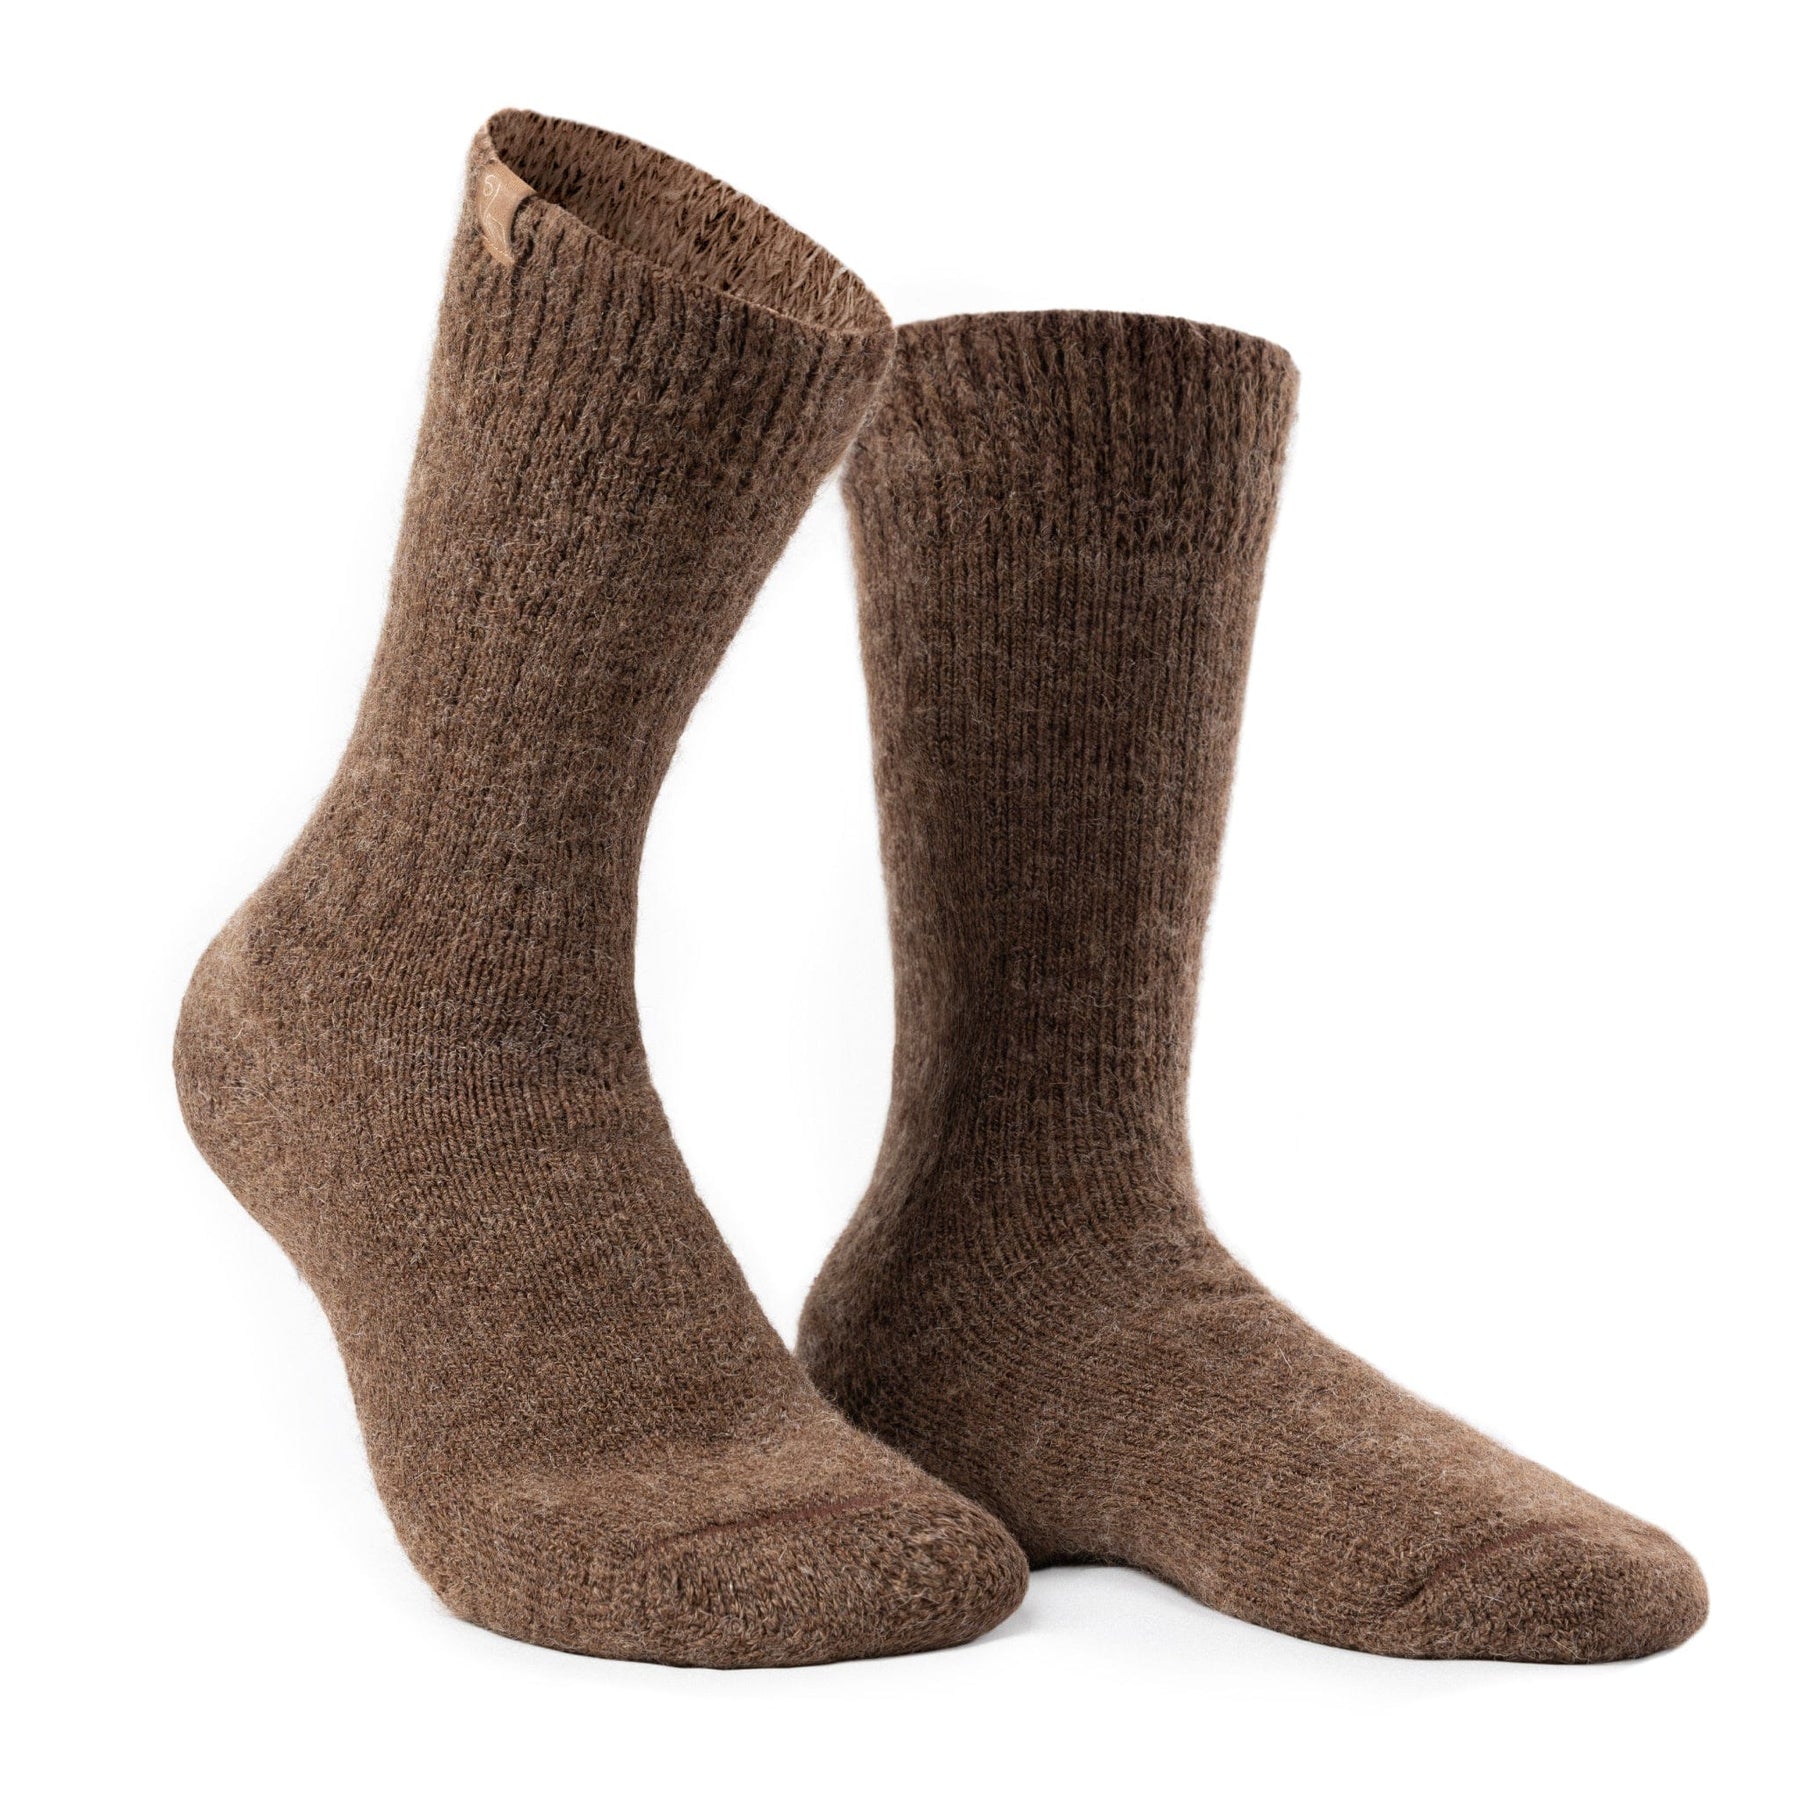 Source of Envy - Cable Knit 100% Alpaca Socks for Women